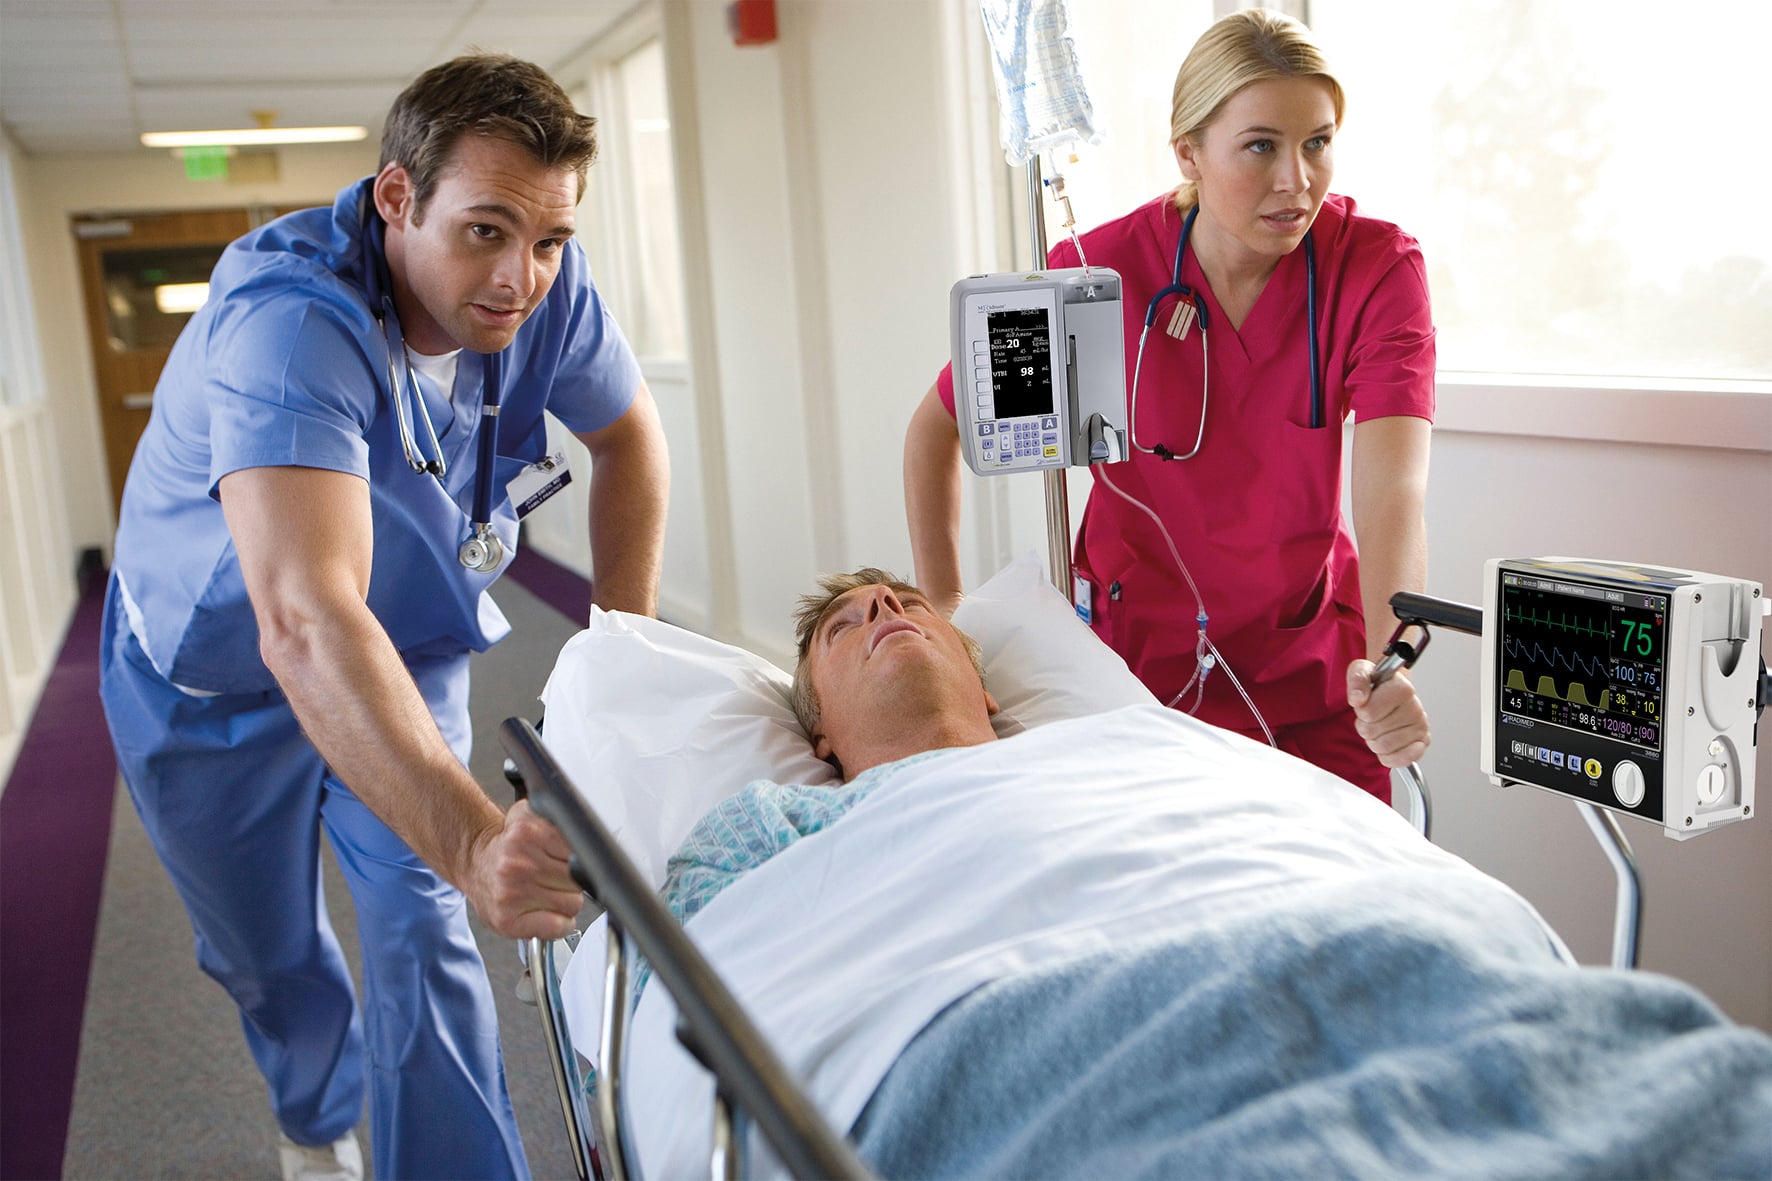 Patient on a infusion pump getting pushed by doctors in a hospital.